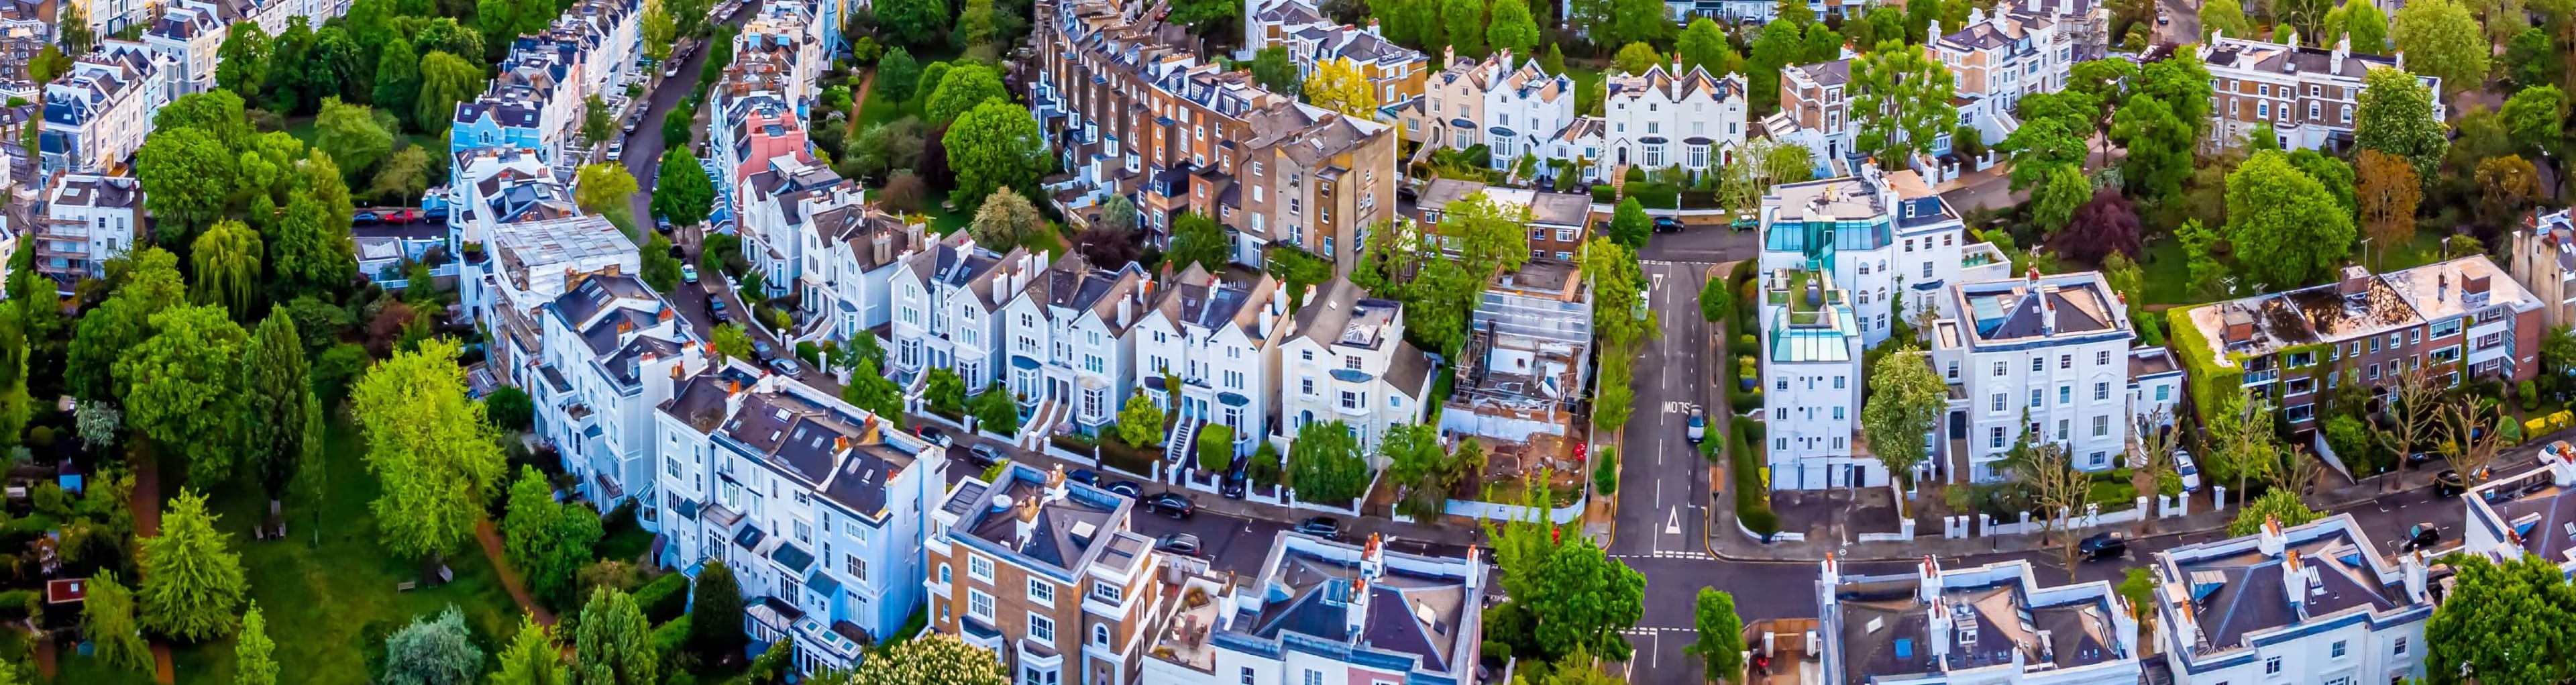 An aerial view of London's Notting Hill